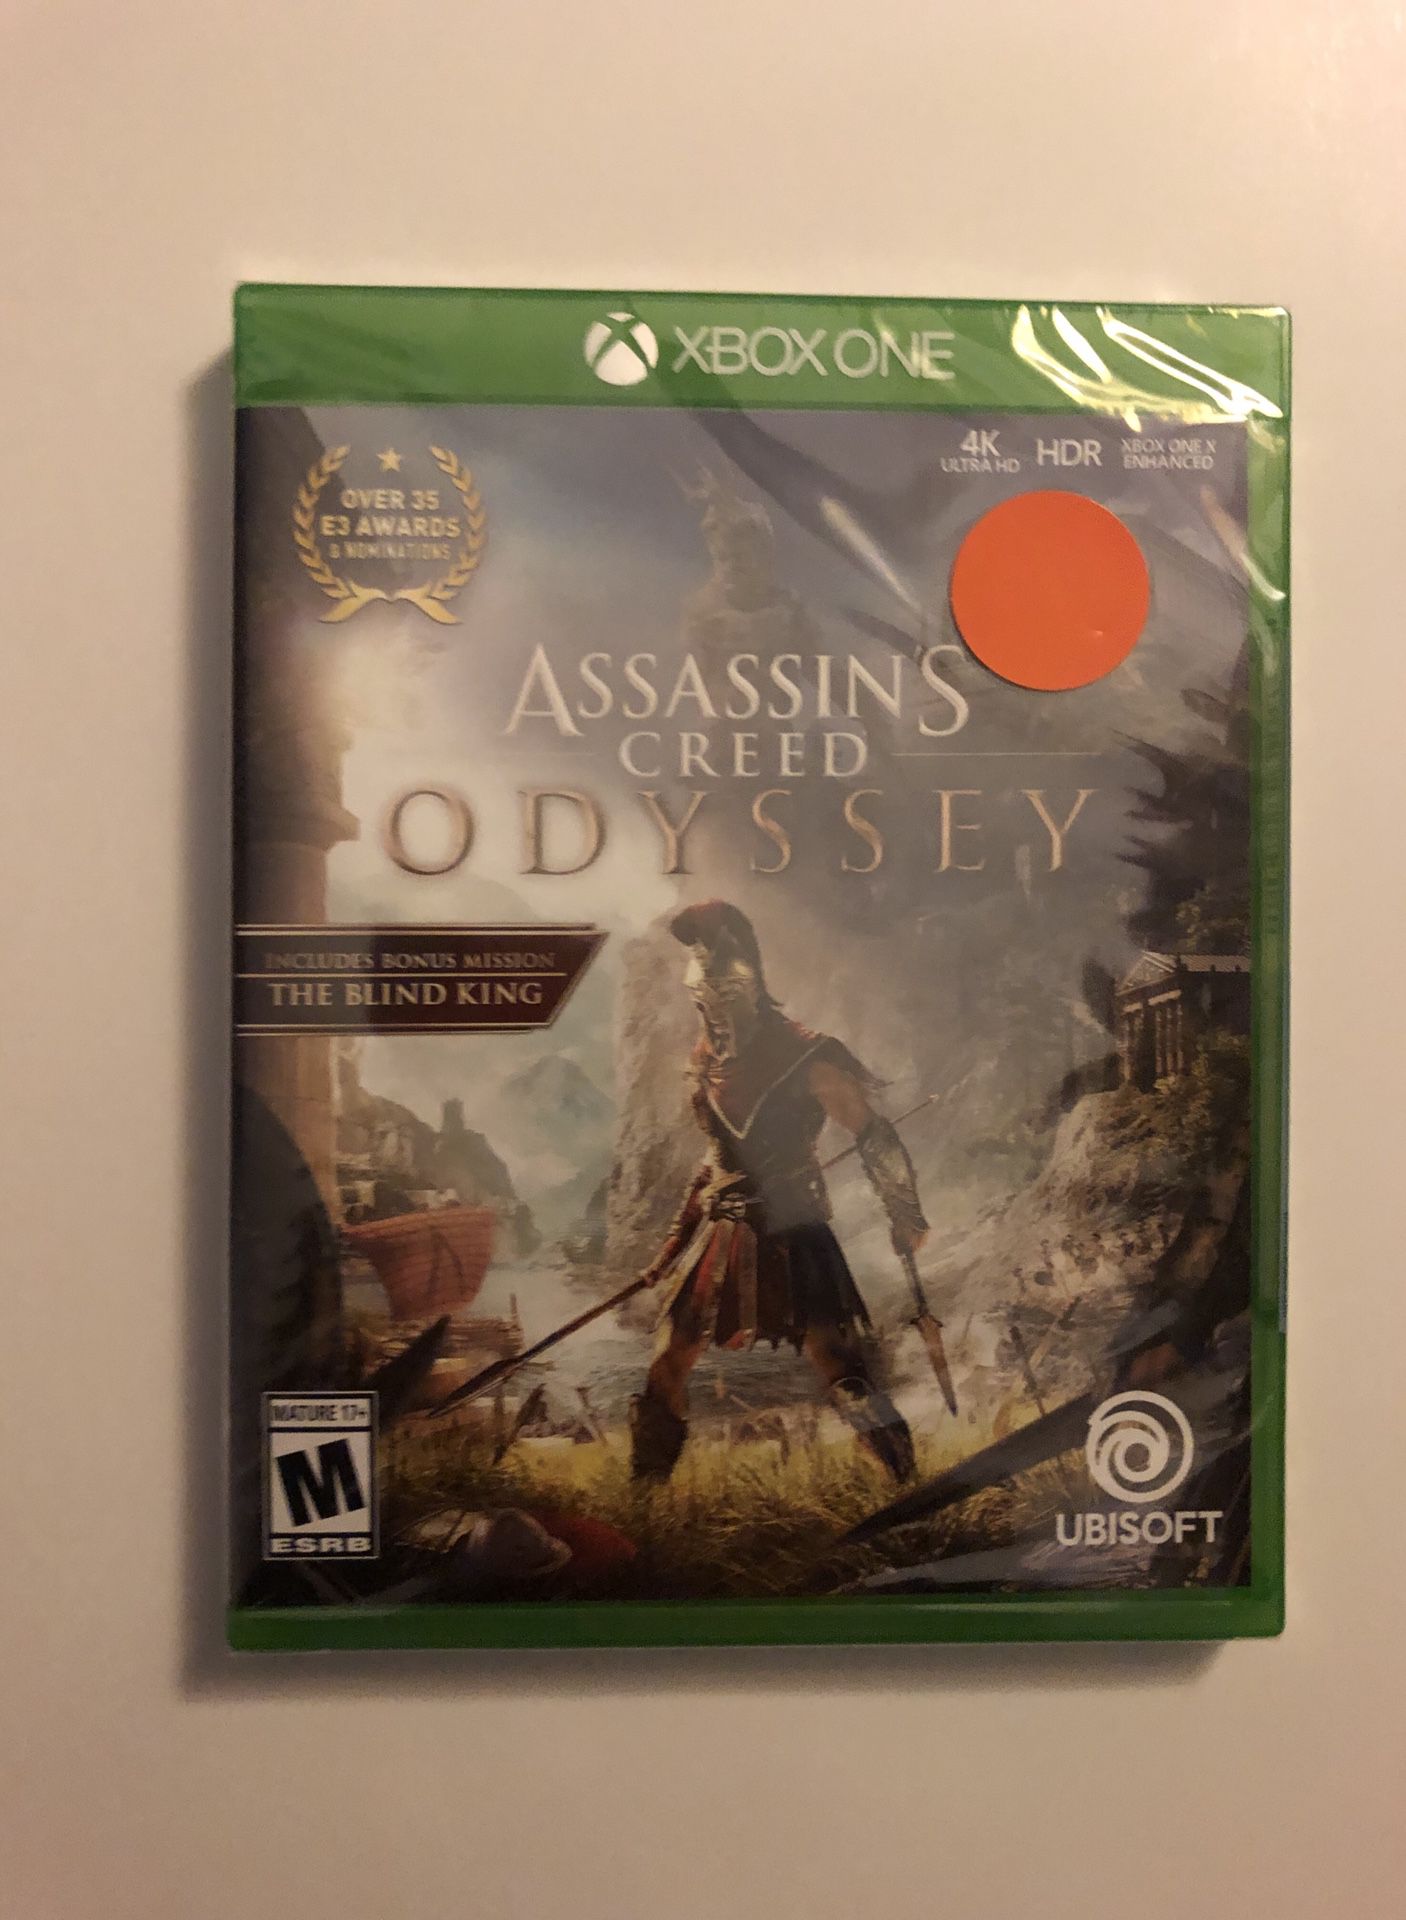 Assassins Creed Odyssey for Xbox One